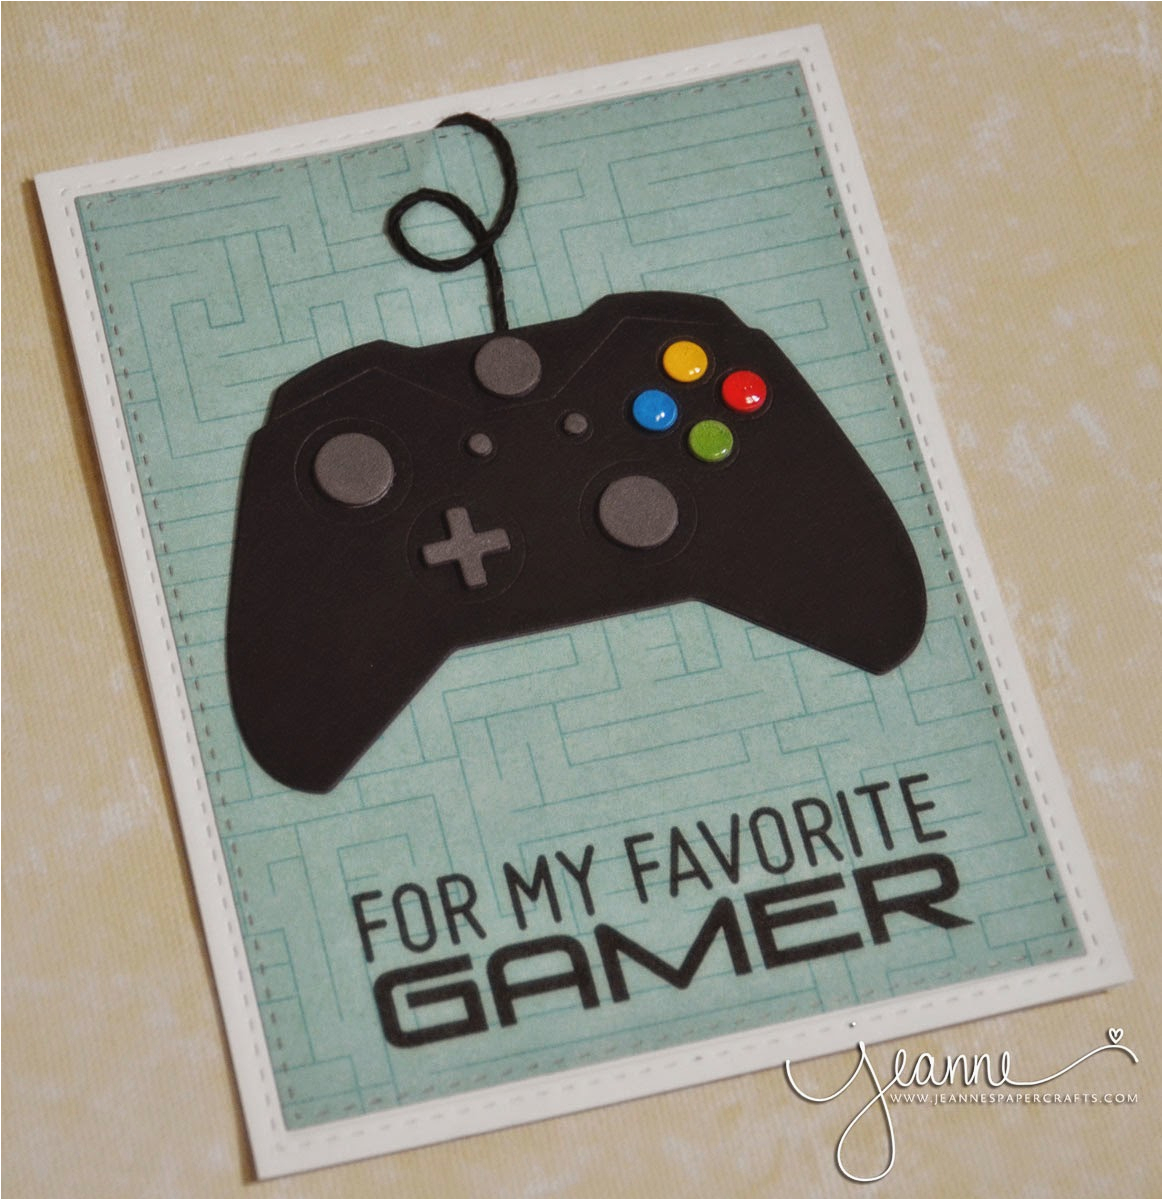 jeanne 39 s paper crafts for my favorite gamer